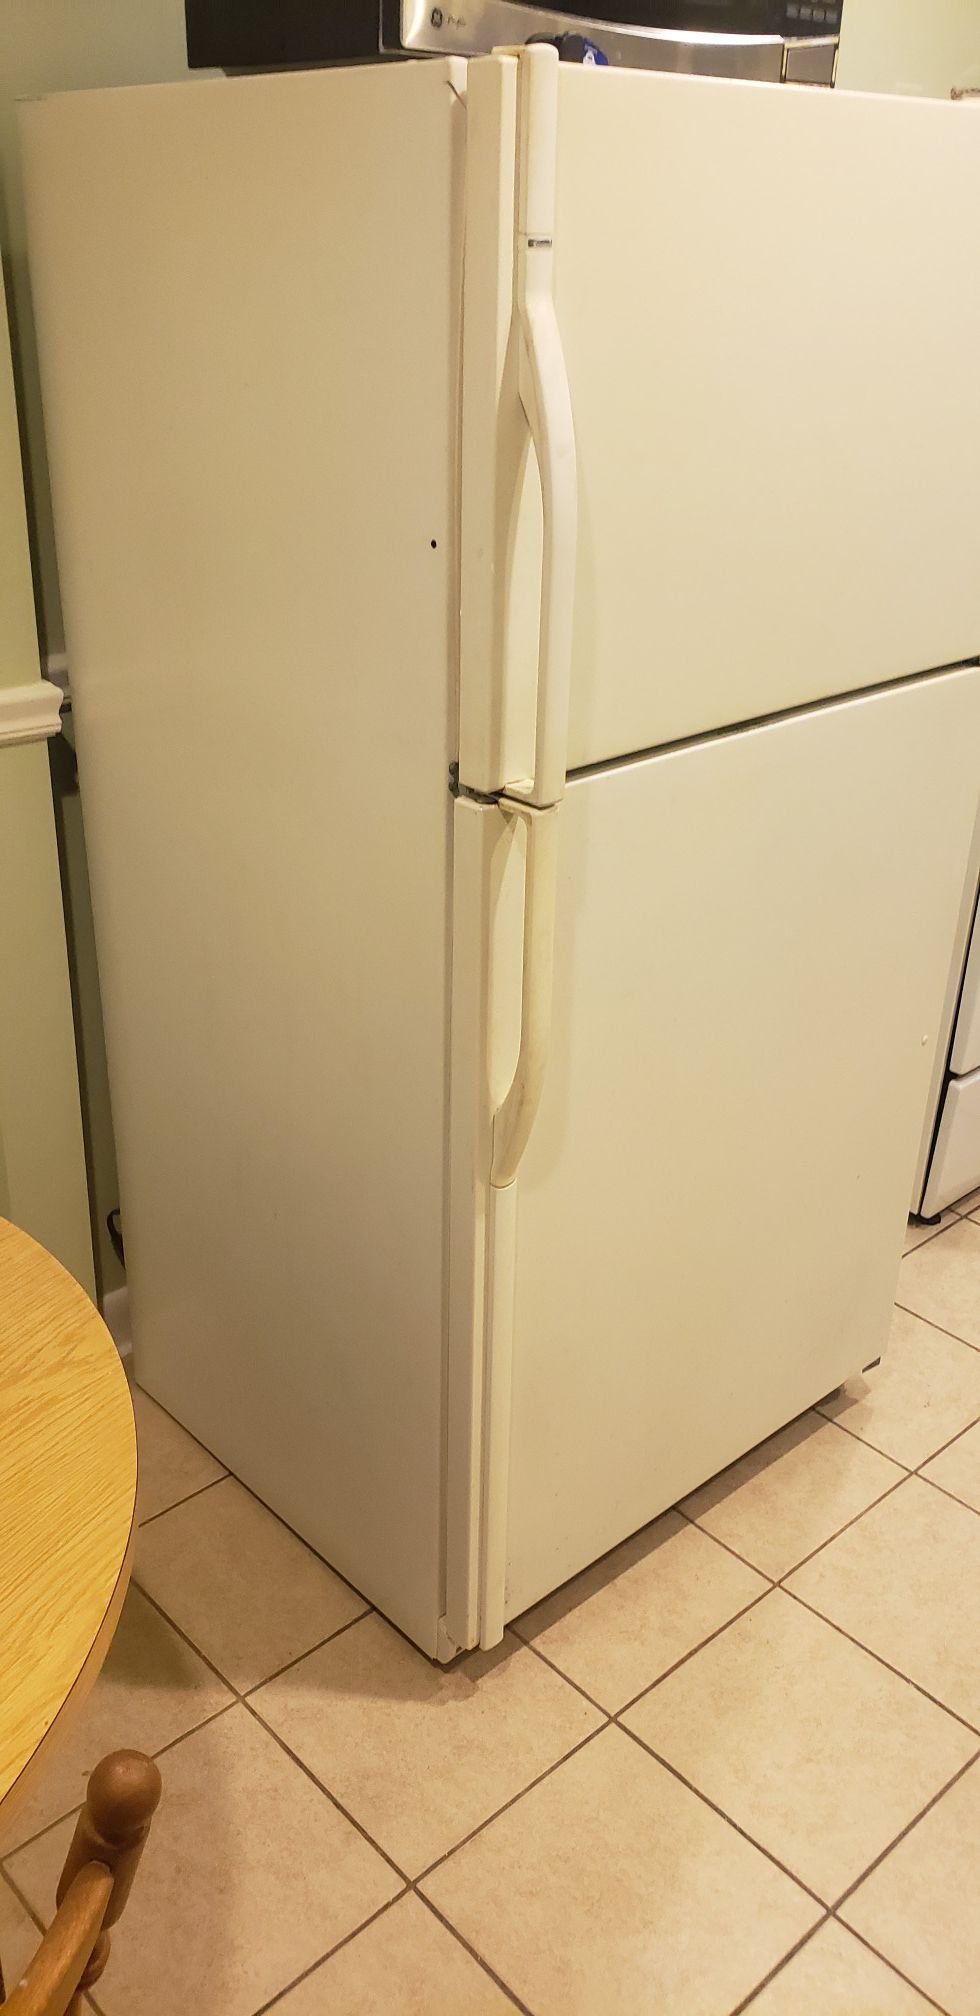 White Kenmore refrigerator for sale